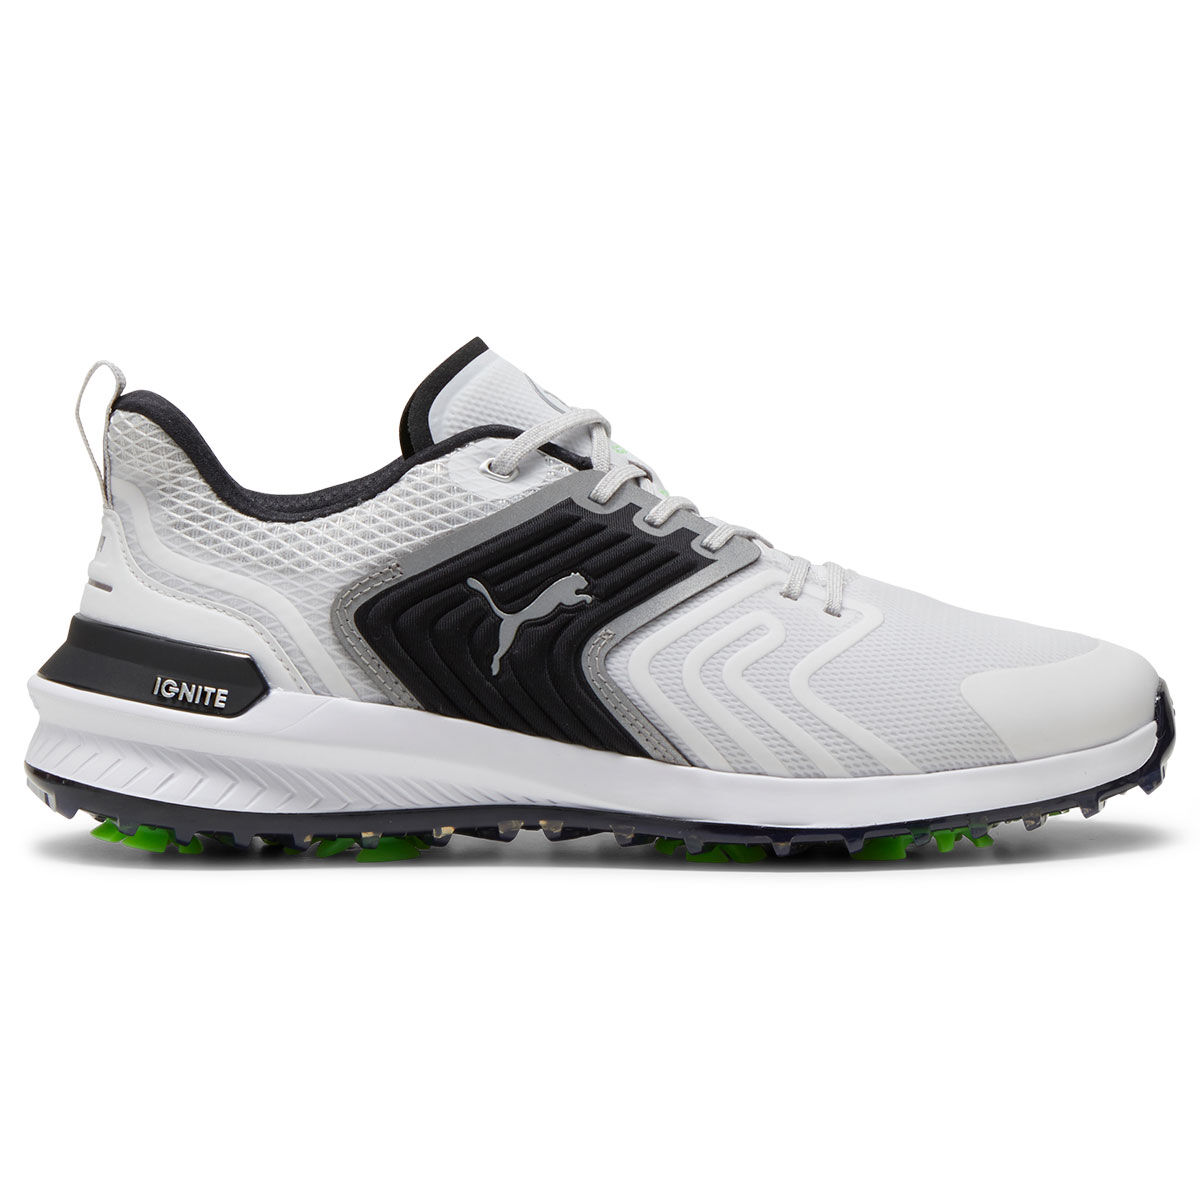 PUMA Men’s IGNITE Innovate Waterproof Spiked Golf Shoes, Mens, Feather gray/black, 10 | American Golf